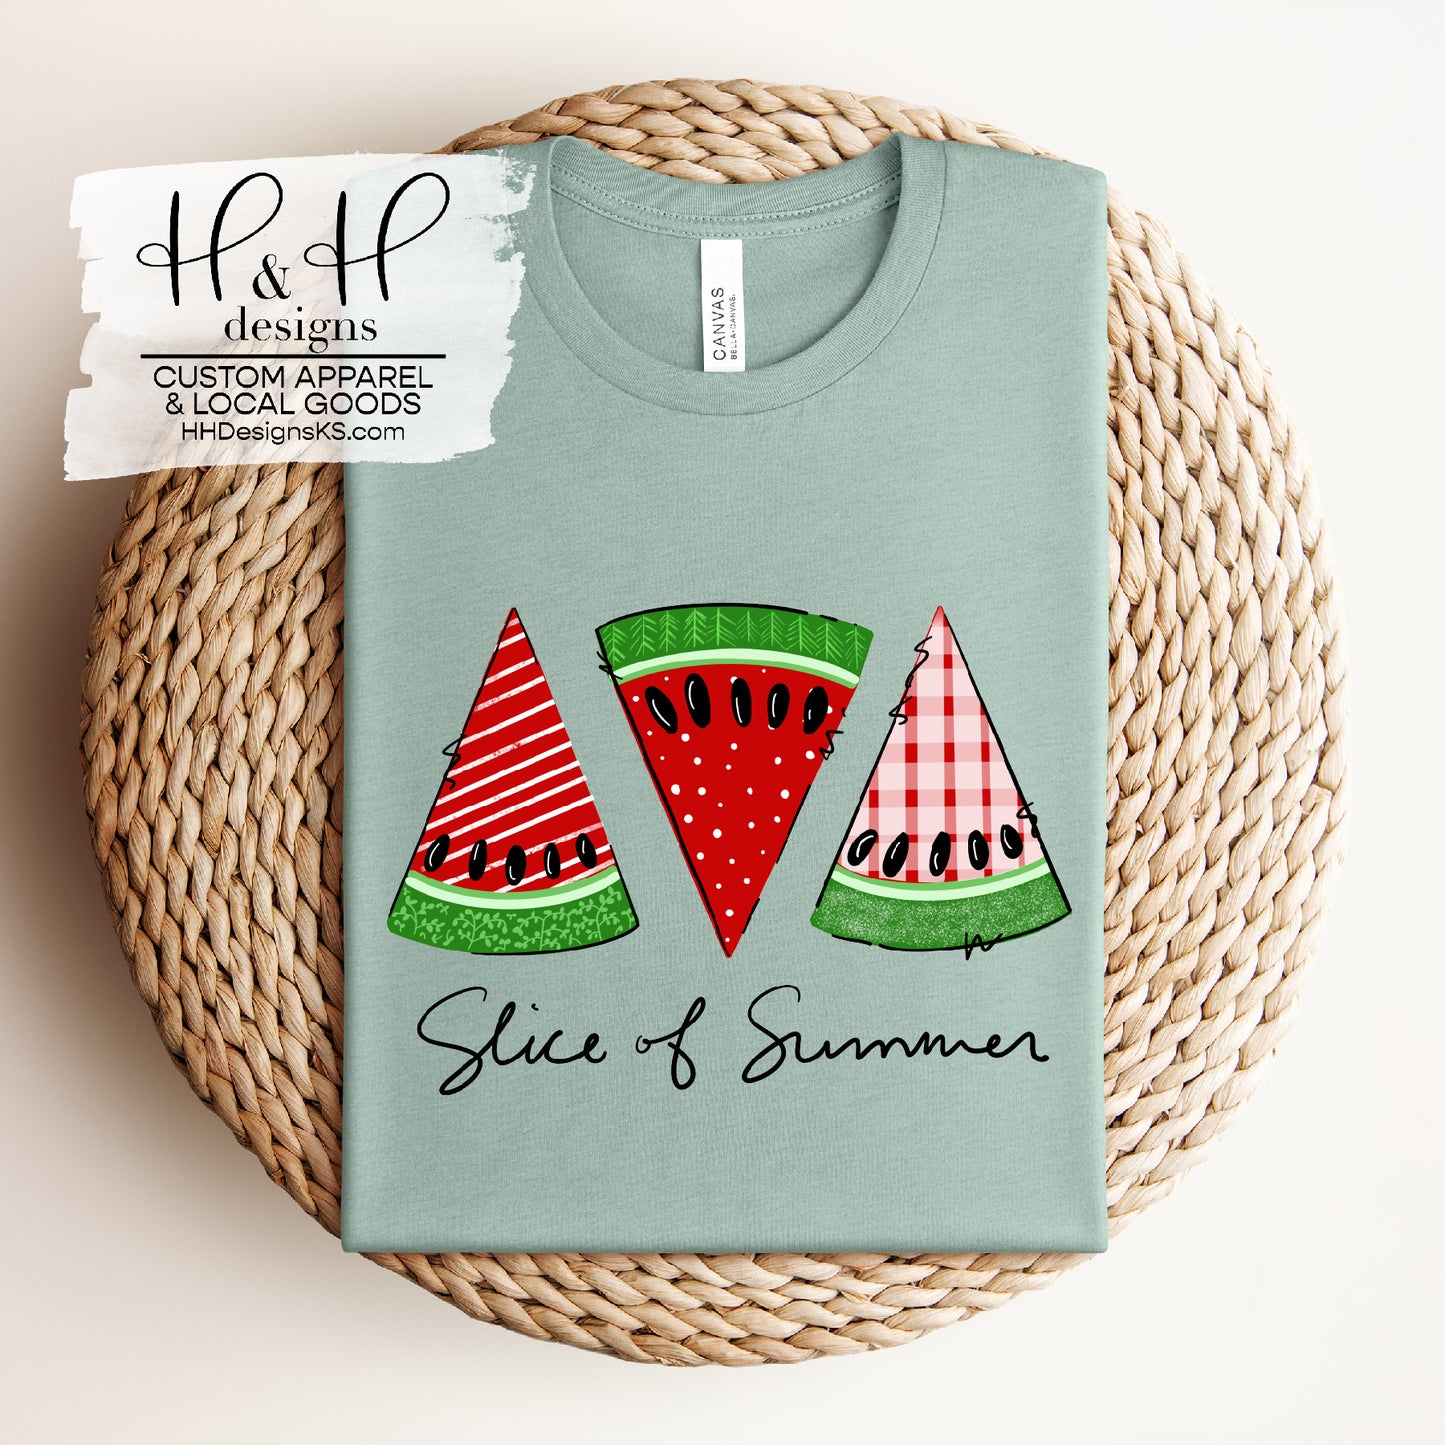 Slice of Summer Watermelons